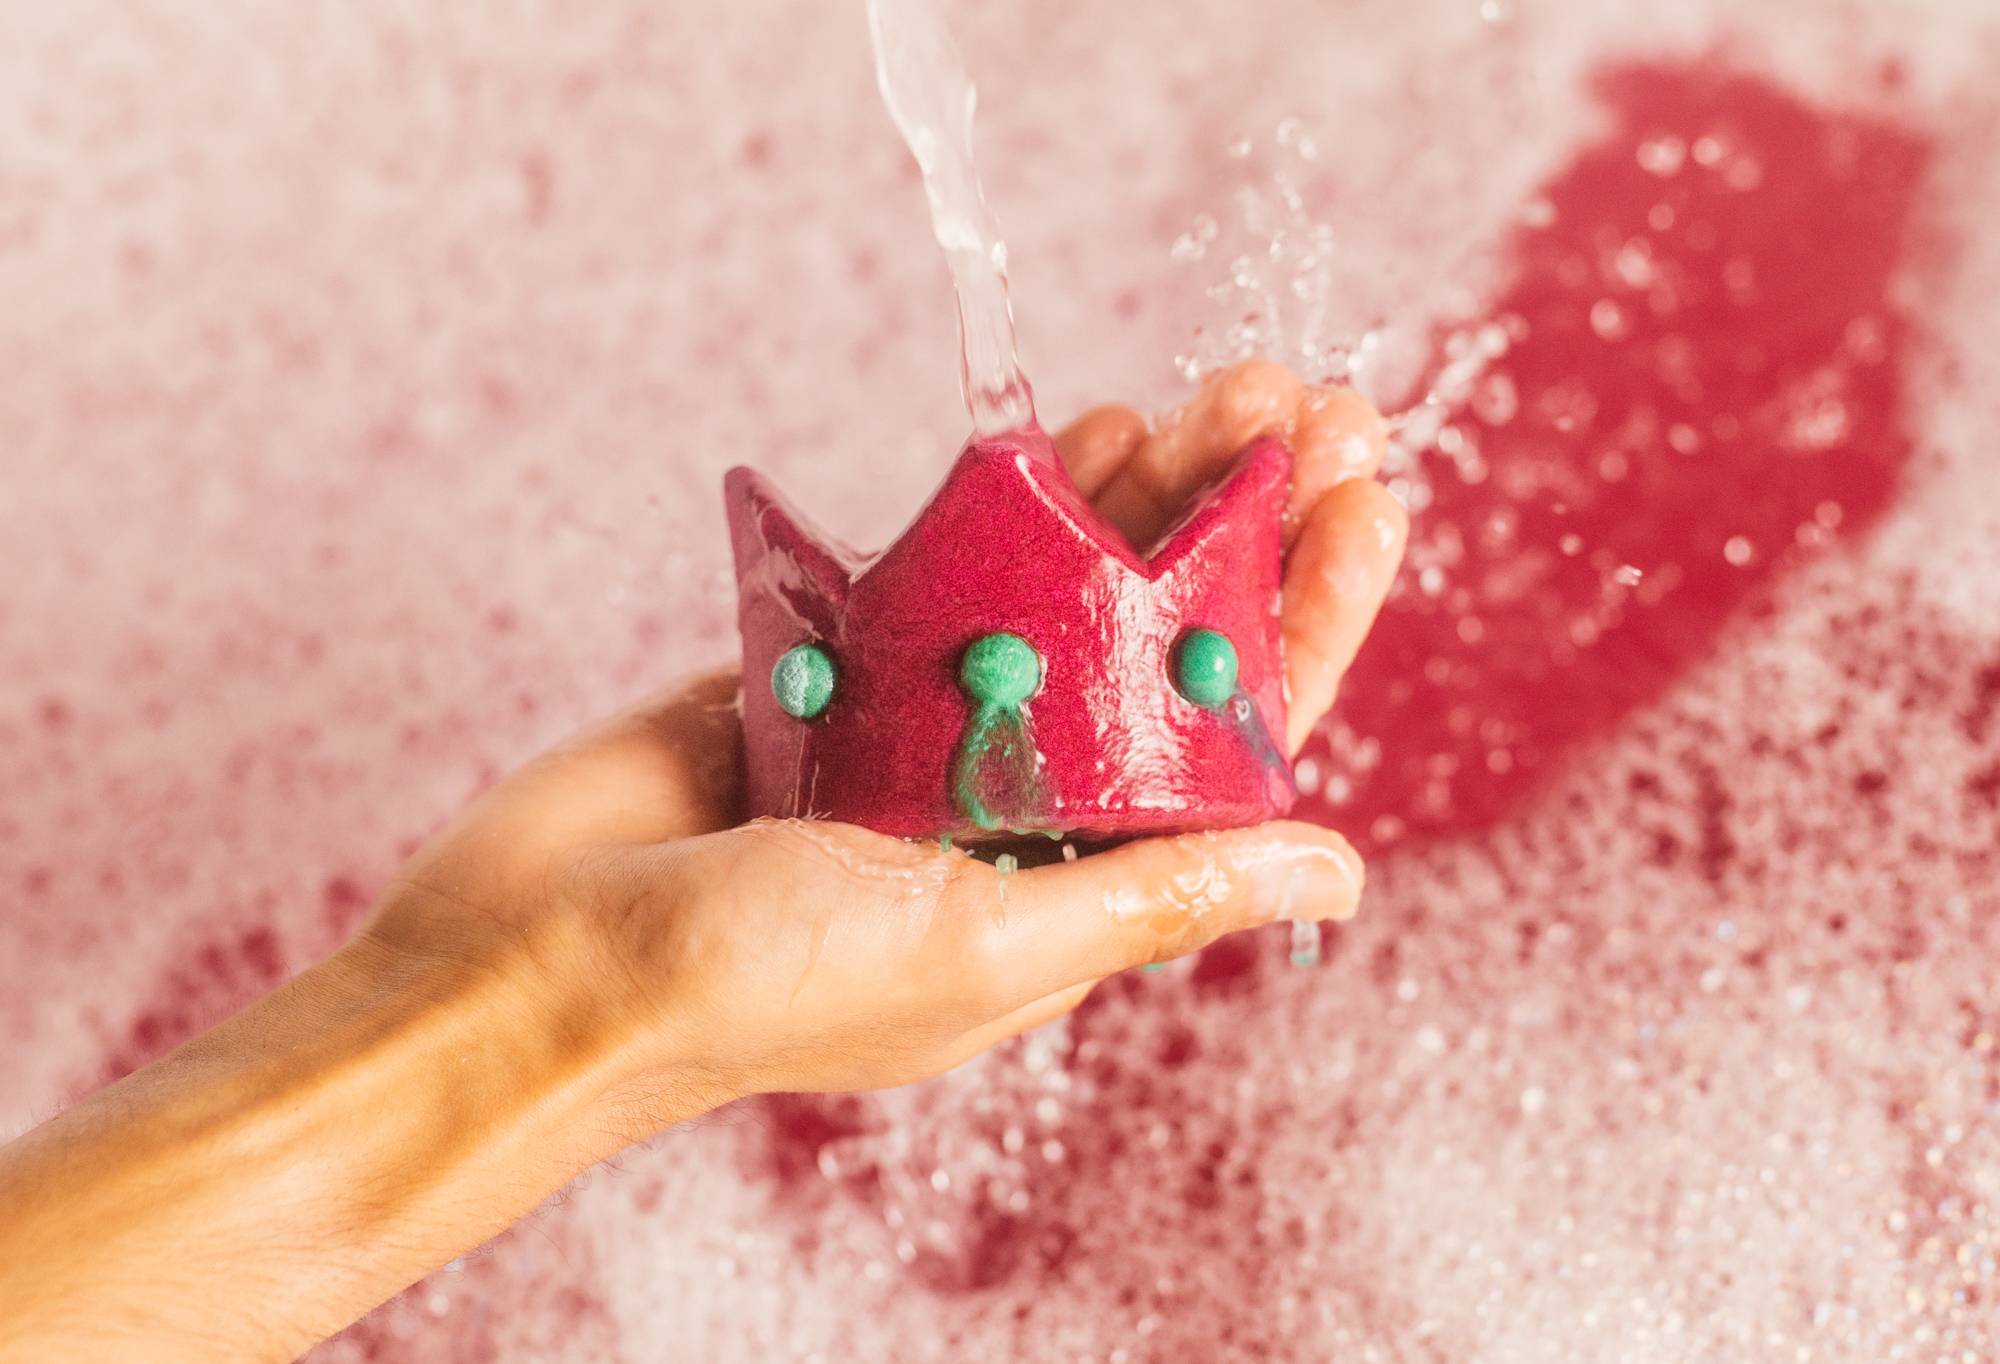 Image shows a close-up of bubble bar being held under running tap water. There is deep pink bathwater covered in bubbles behind.